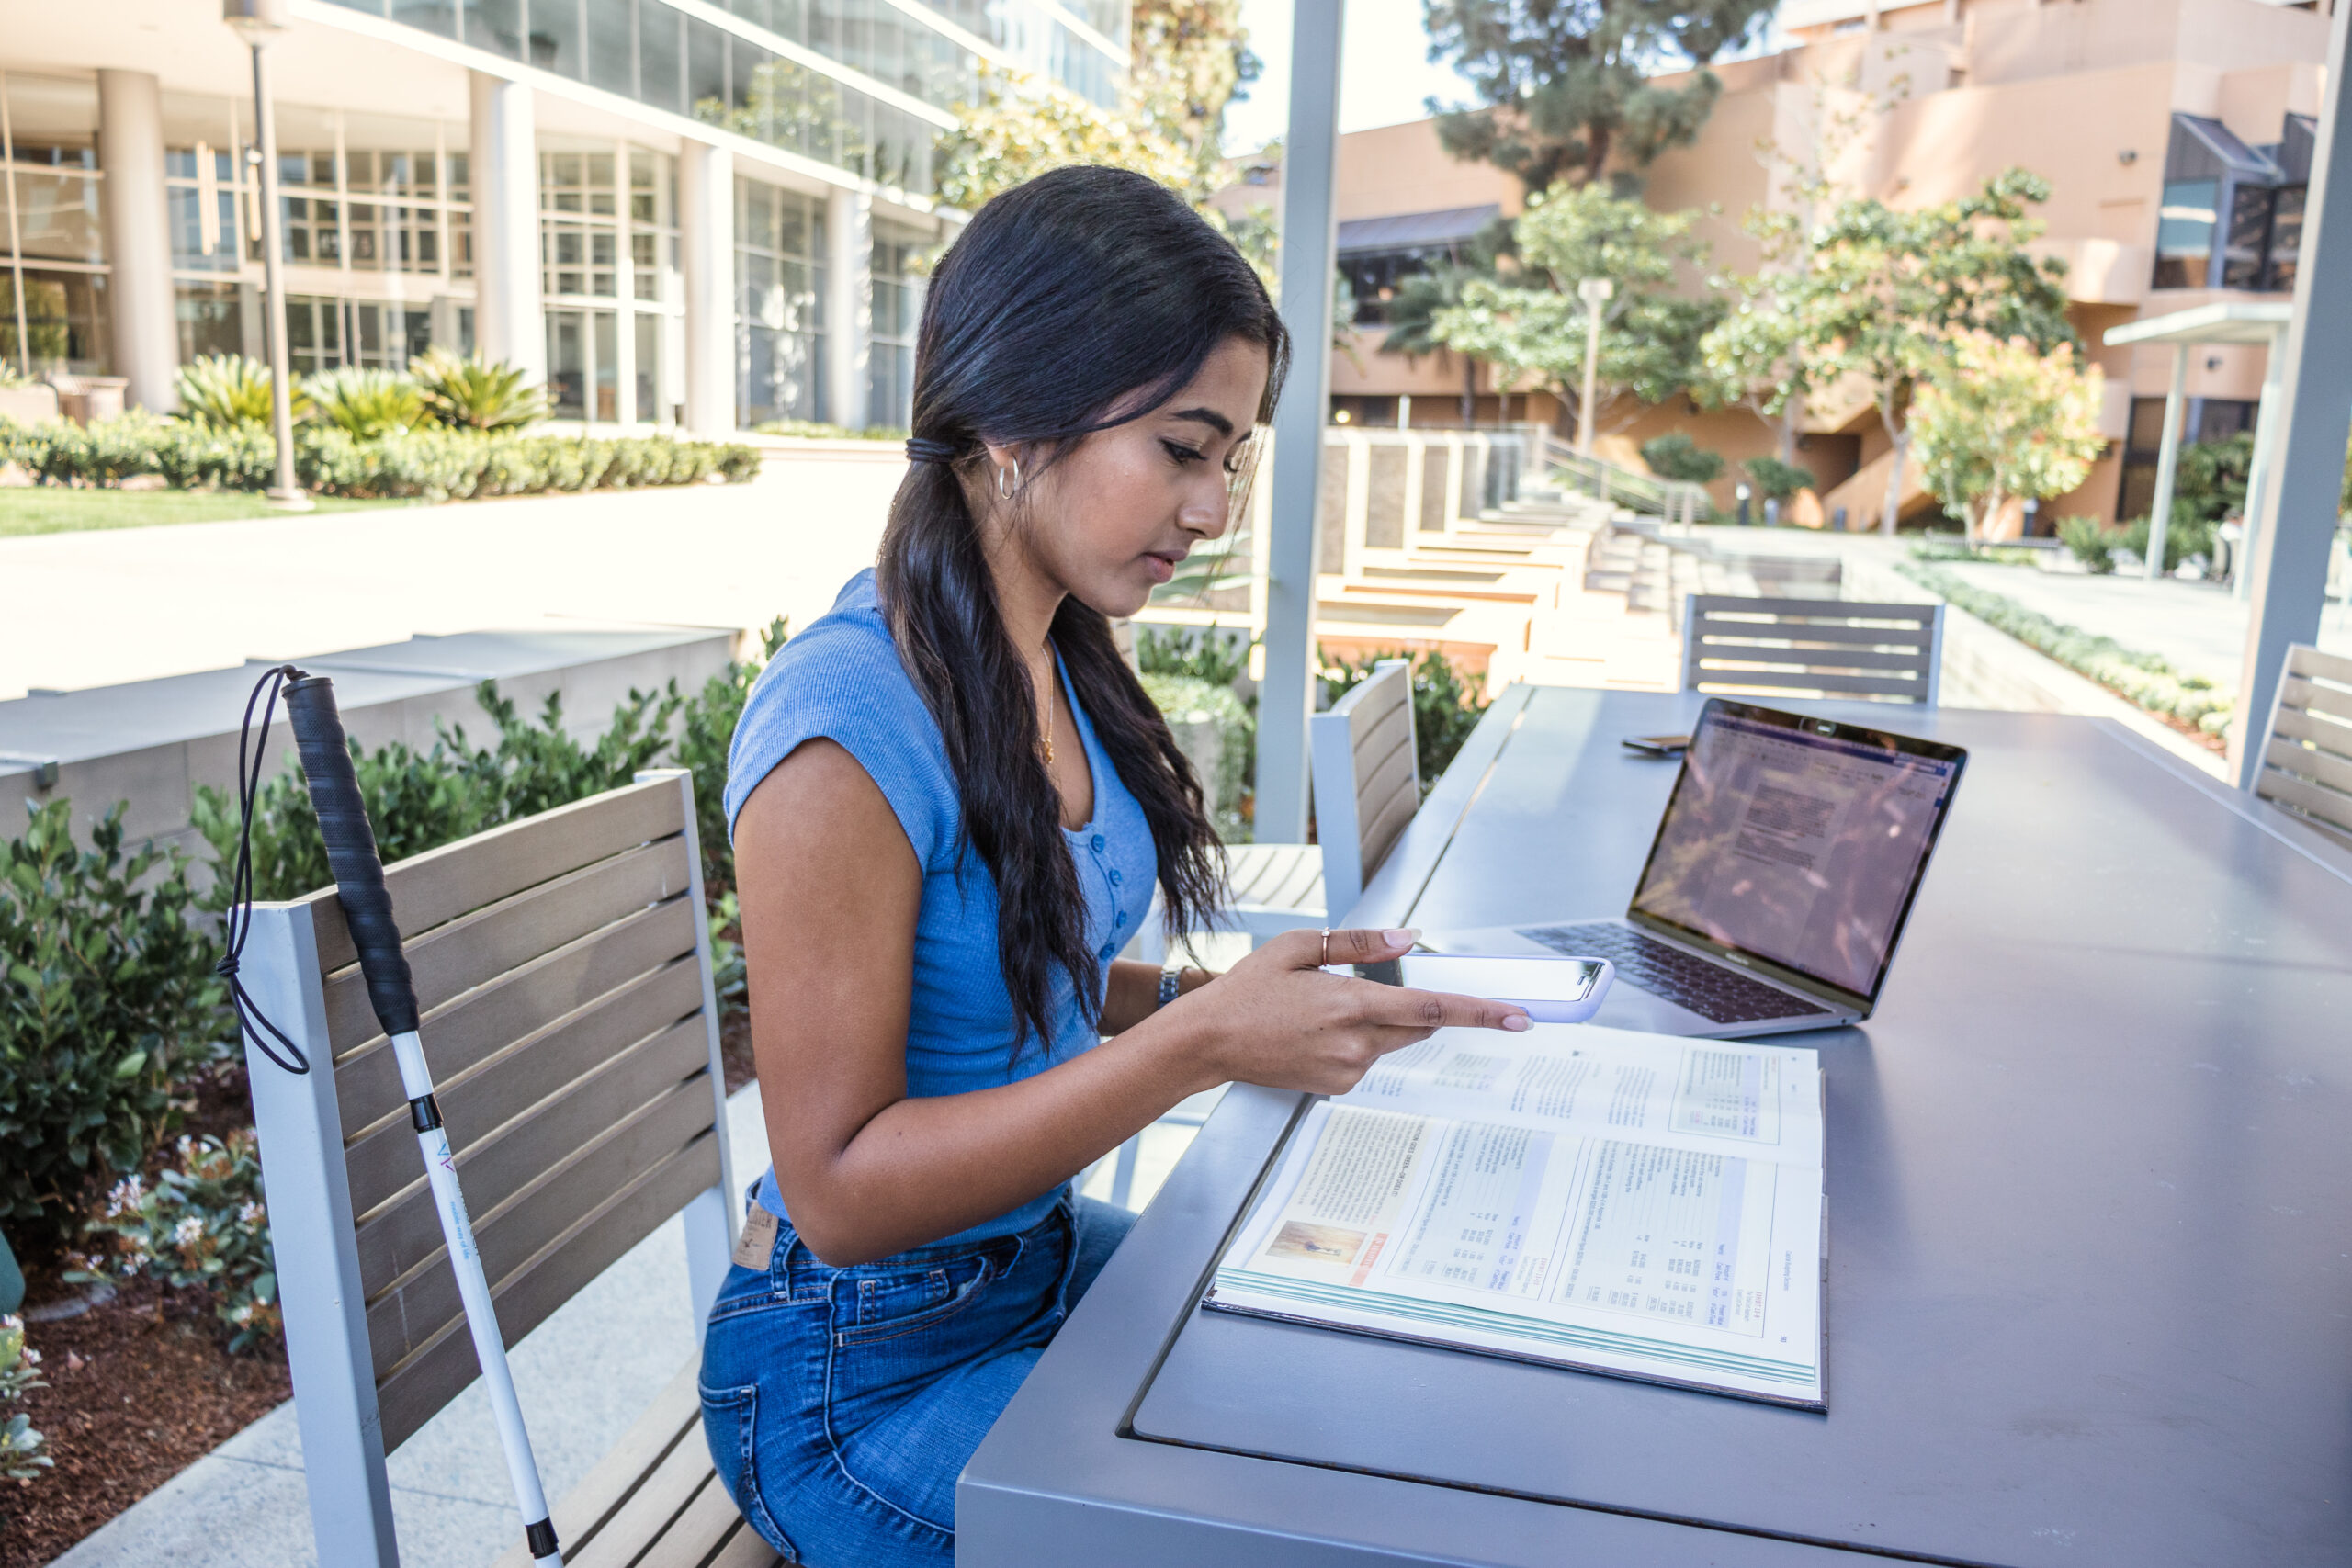 College student sitting at outdoor table using Aira to read non-Braille text book, has white cane by her side